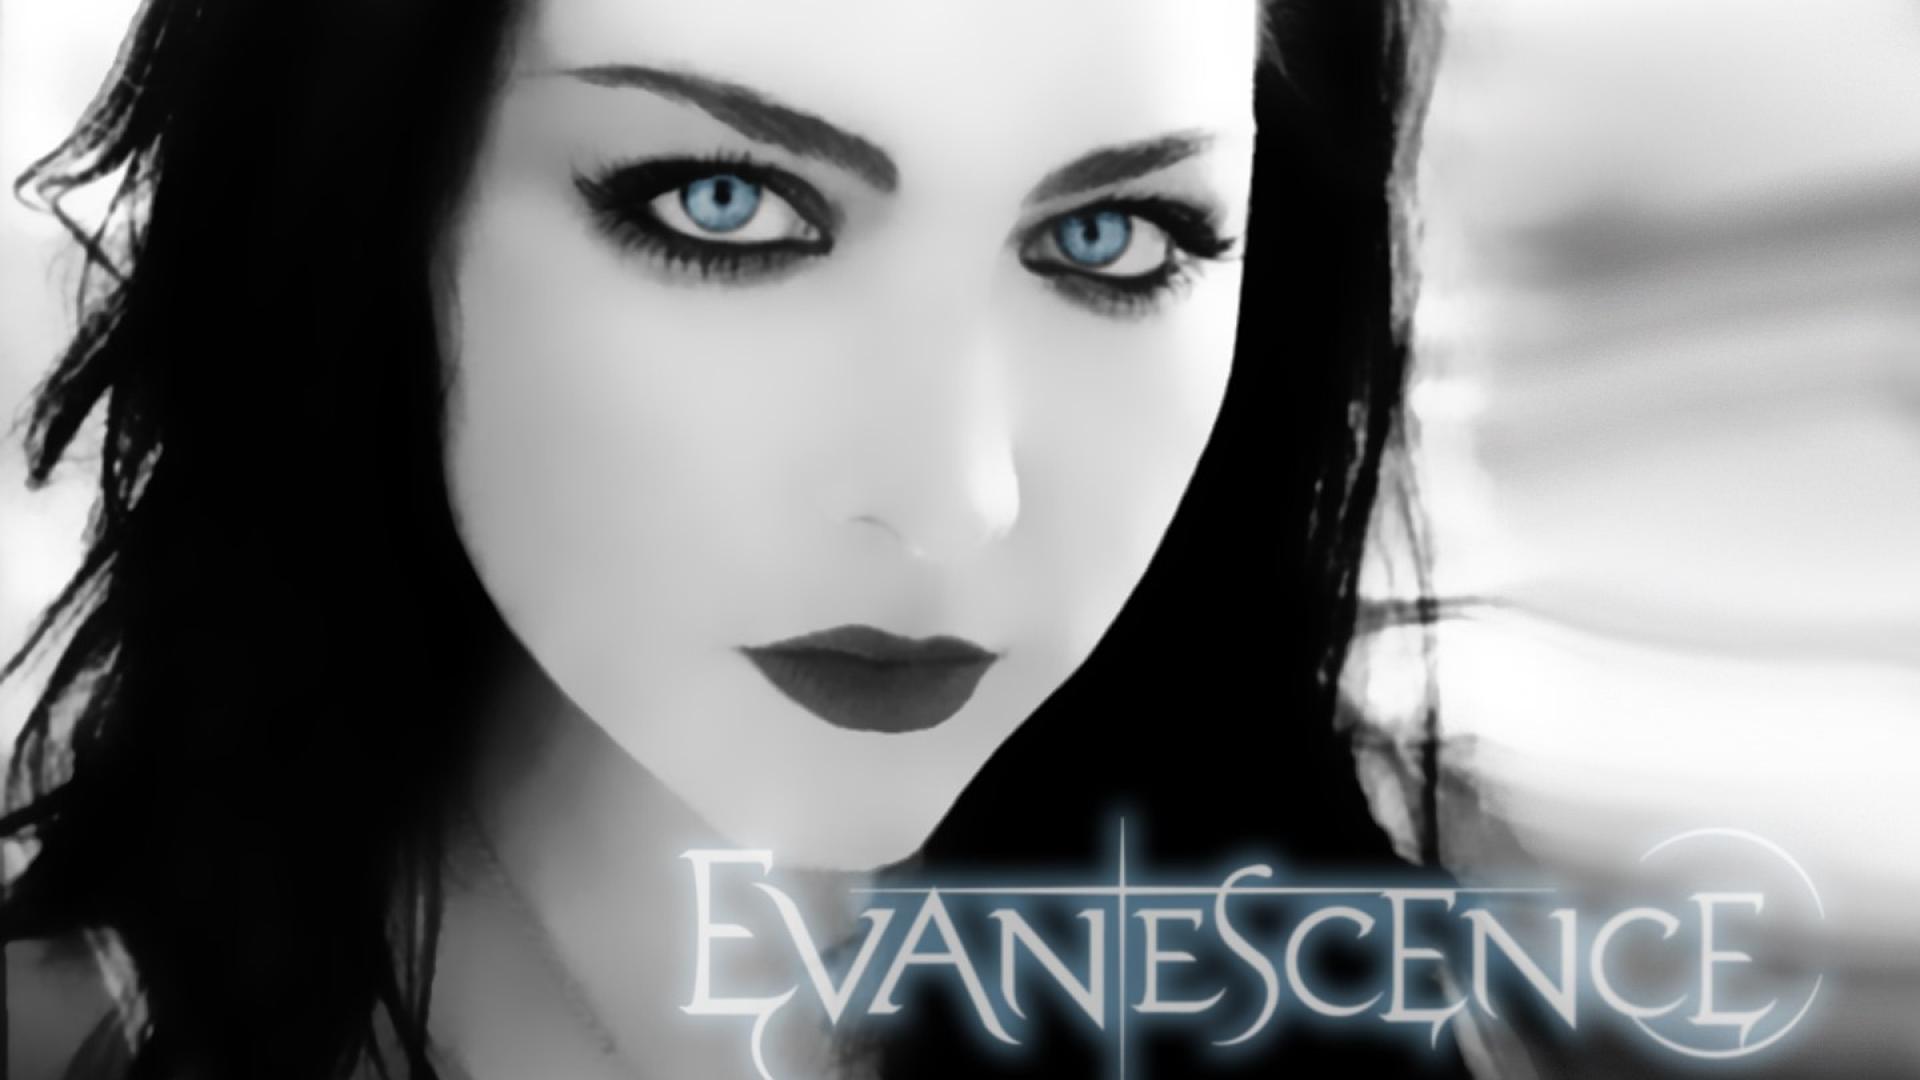 HD Quality Wallpaper | Collection: Music, 1920x1080 Evanescence